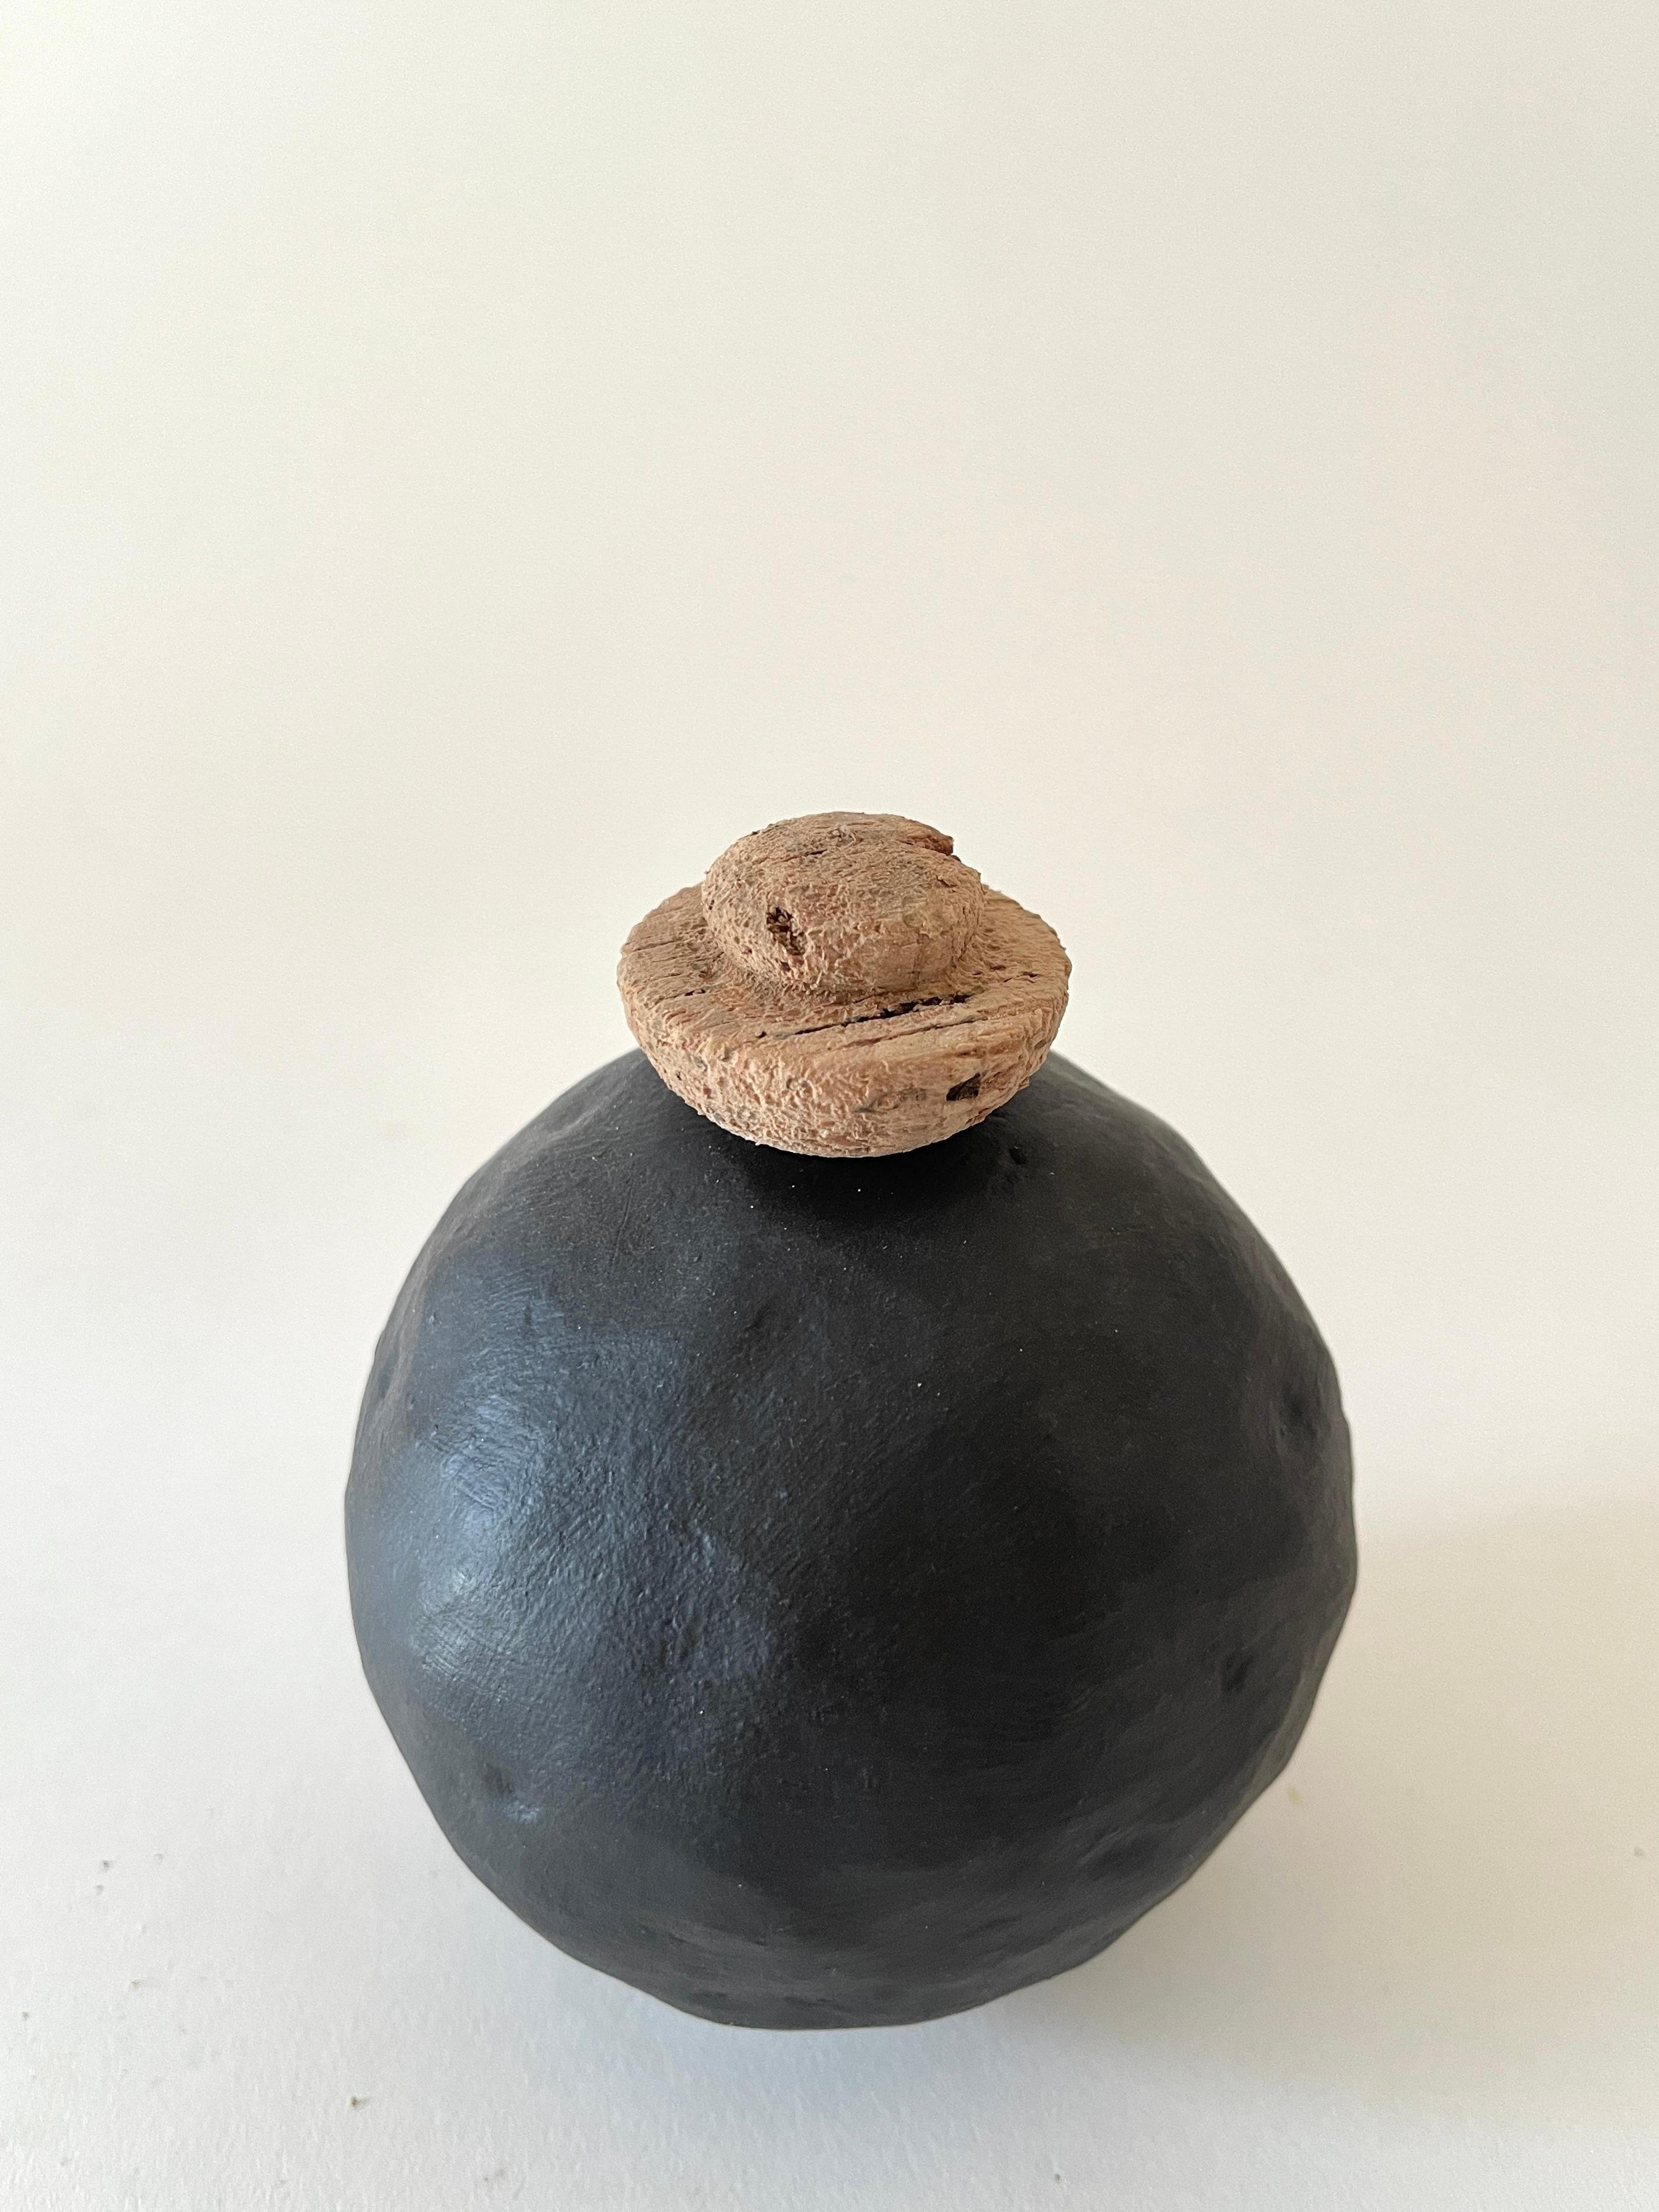 Edwina Black Vase by Meg Morrison
One of a kind.
Materials: Ceramic, cork.
Dimensions: Ø 10 x H 13 cm.

All sizes are approximate. Although vases are watertight condensation may form on the bottom. Please protect delicate surfaces. Please